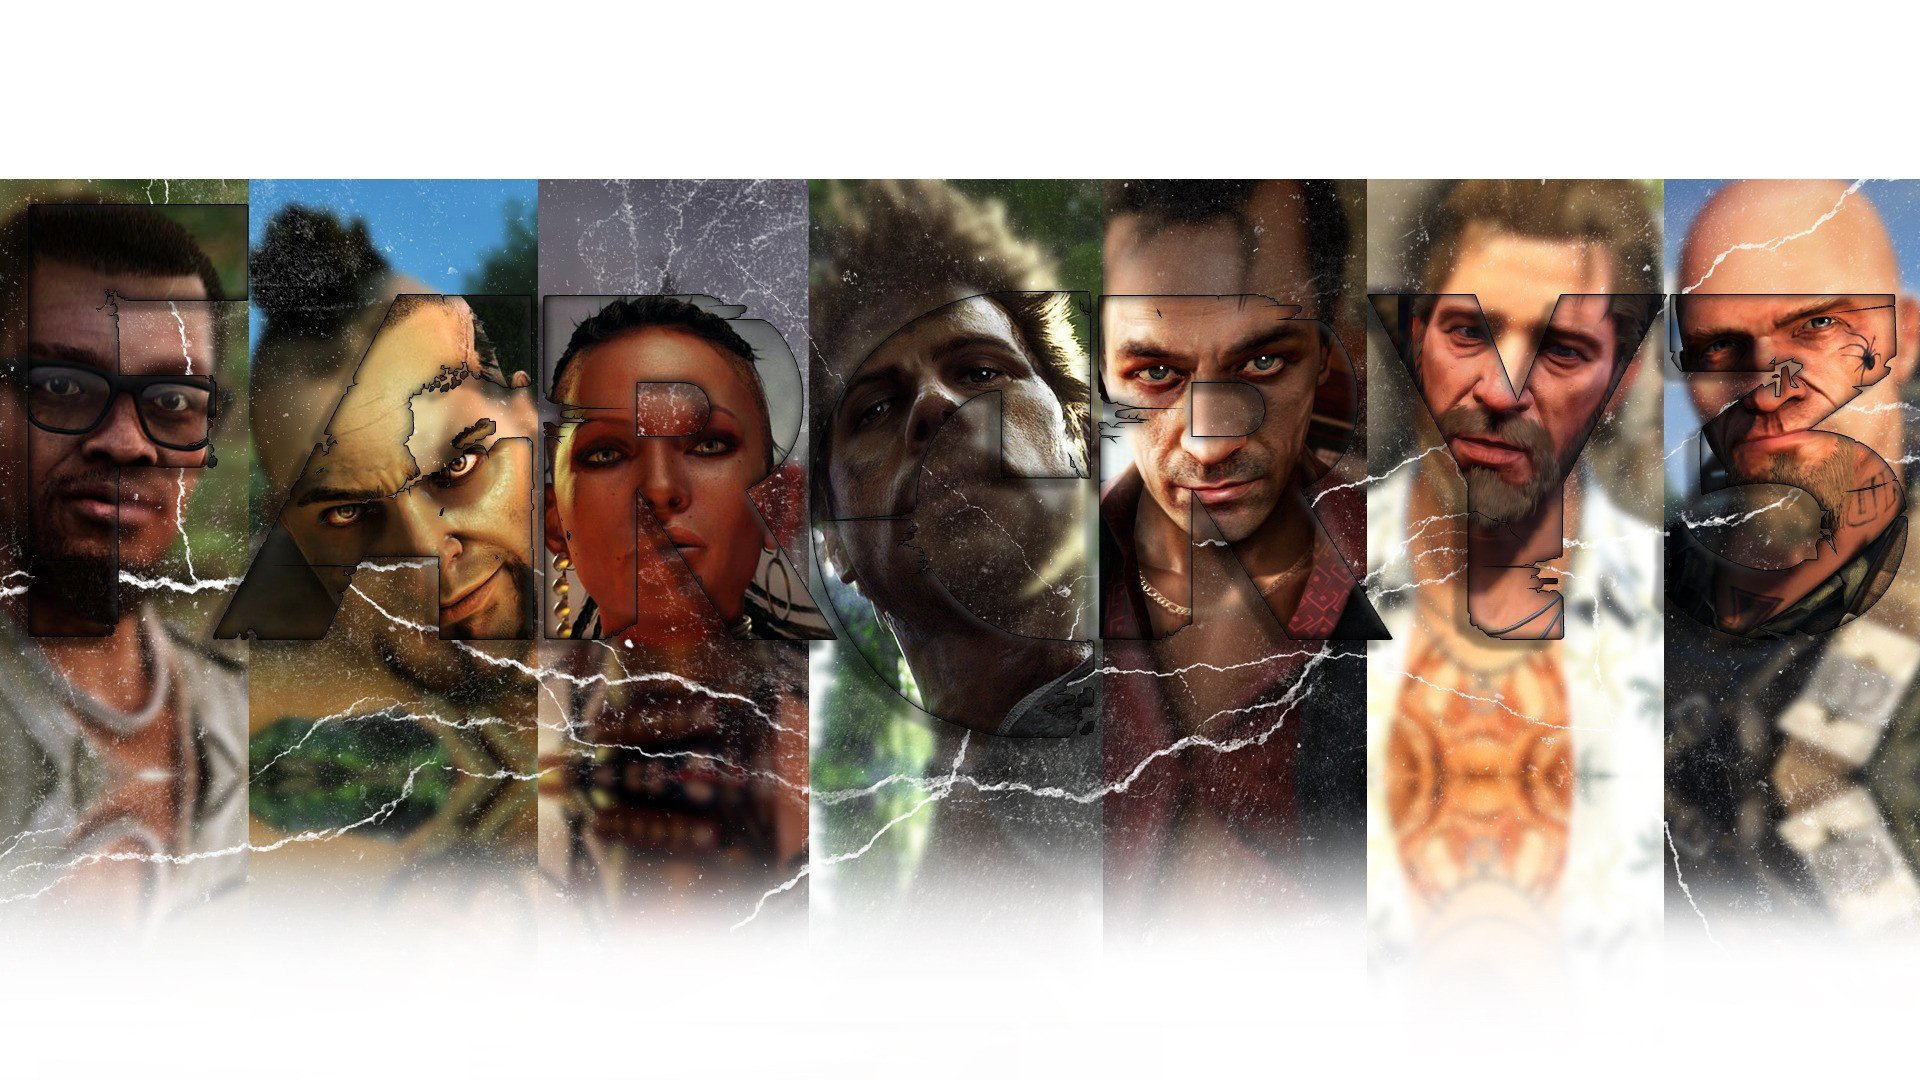 Dennis Rogers Citra Talugmai Hoyt Volker Buck Sam Becker Video Game Characters Face Vaas Montenegro Jason Brody Far Cry 3 Hd Wallpapers Desktop And Mobile Images Photos